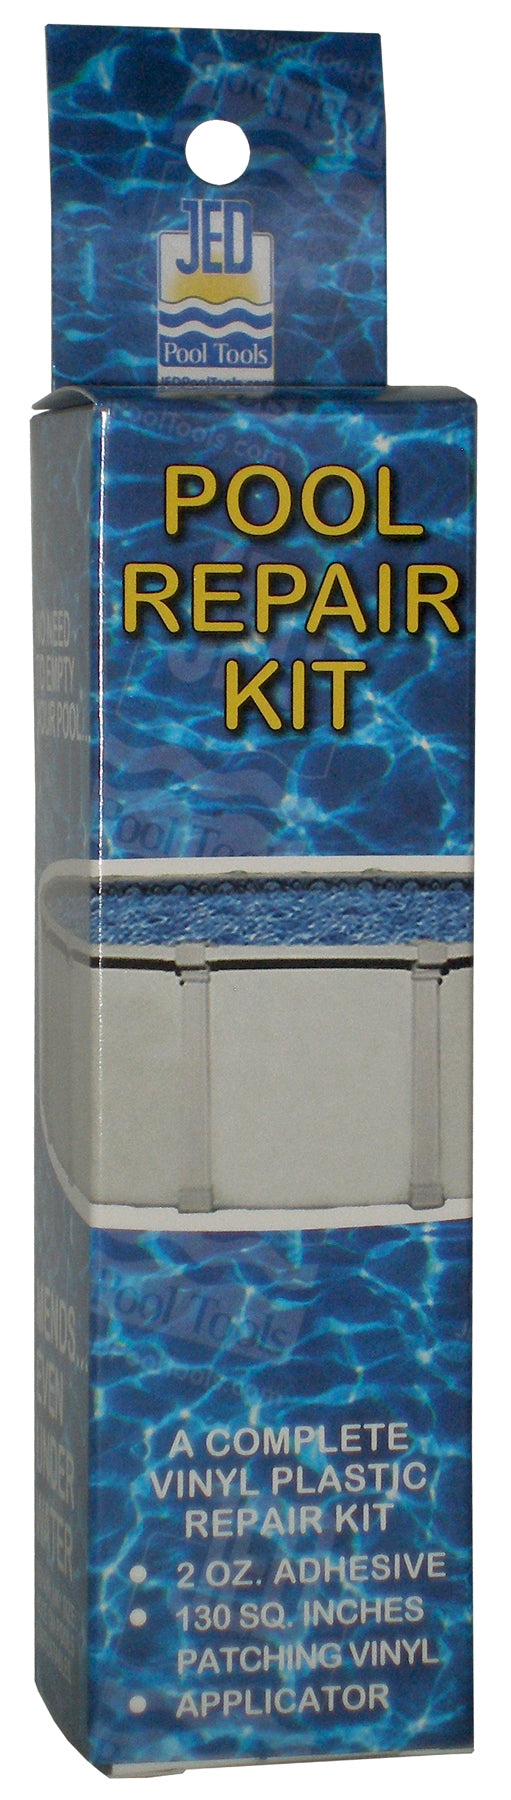 buy pools maintenance kits & accessories at cheap rate in bulk. wholesale & retail outdoor cooler & picnic items store.